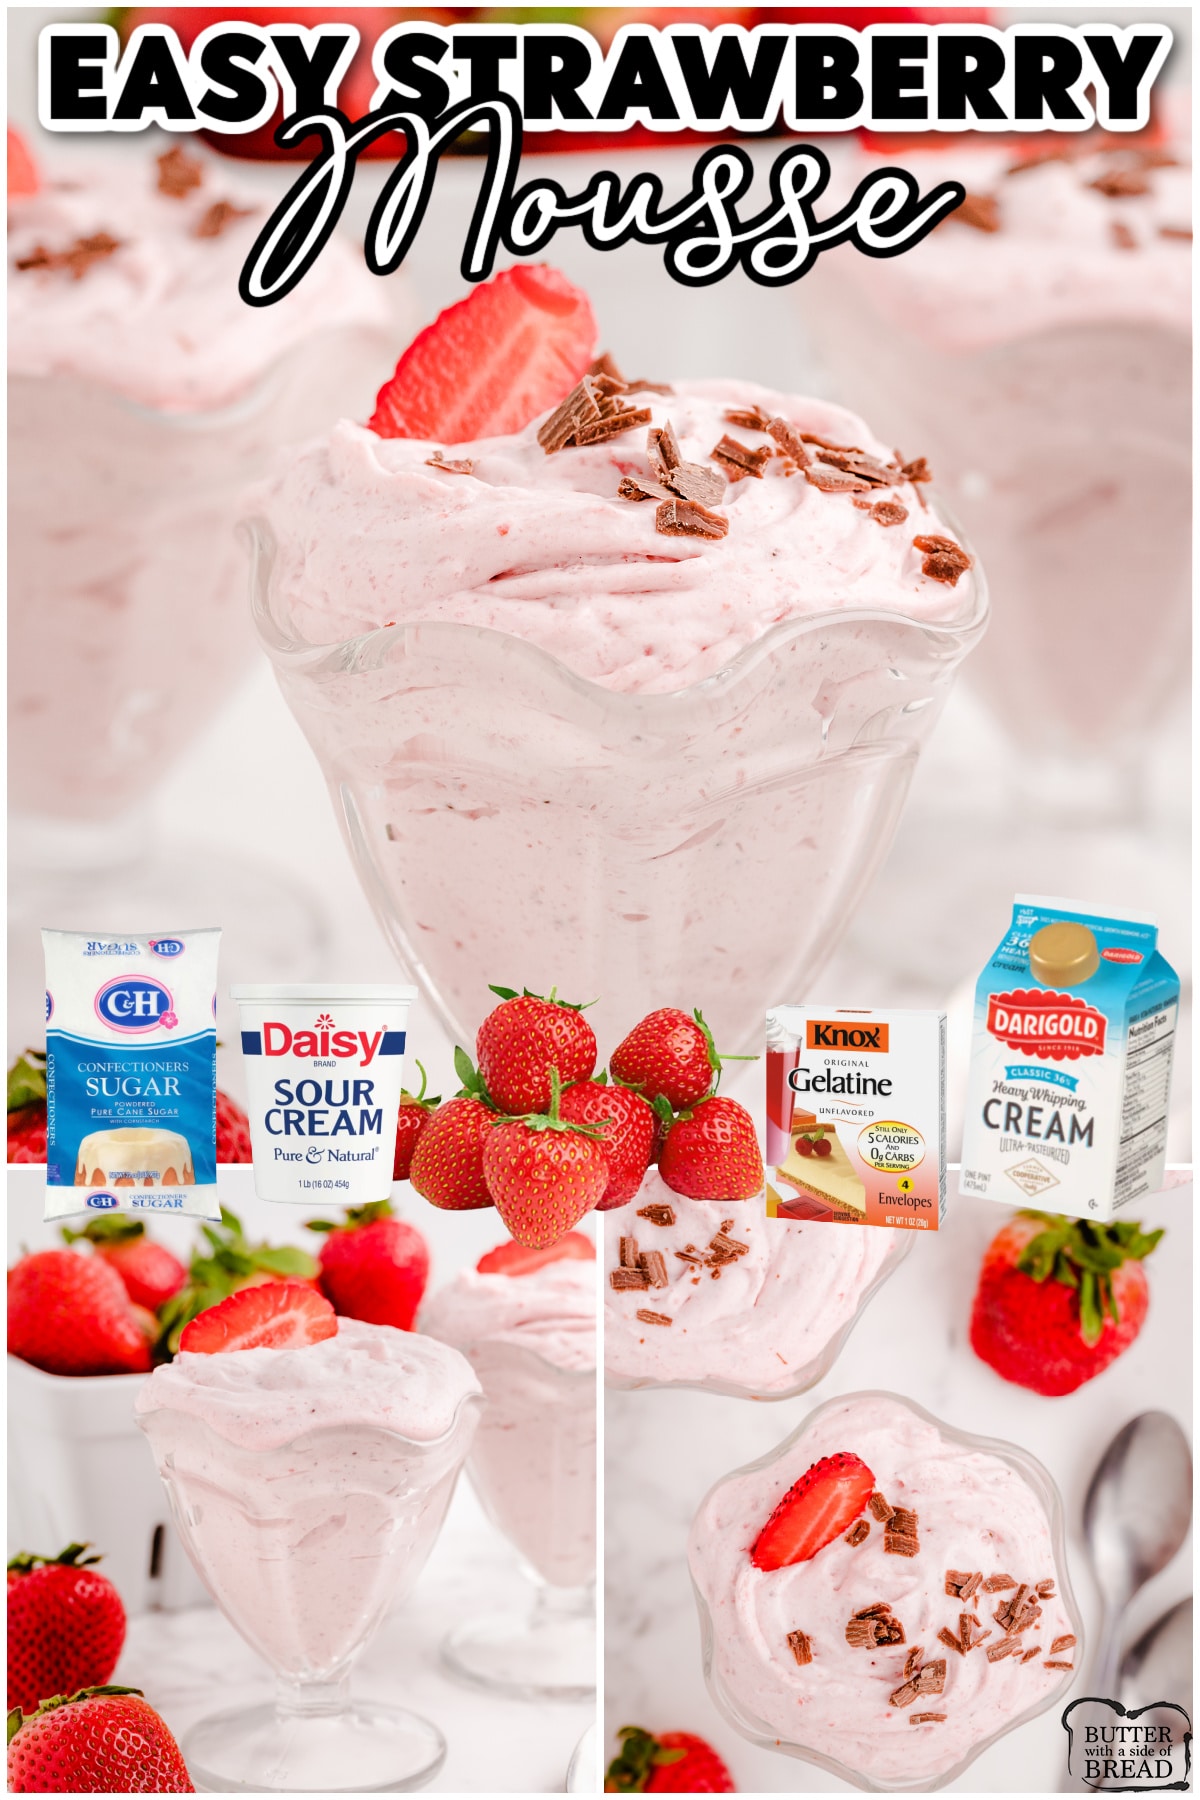 Strawberry Mousse is a beautiful treat made with fresh strawberries, cream & sugar! This strawberry mousse with gelatin is made with only 6 ingredients and has incredible flavor!